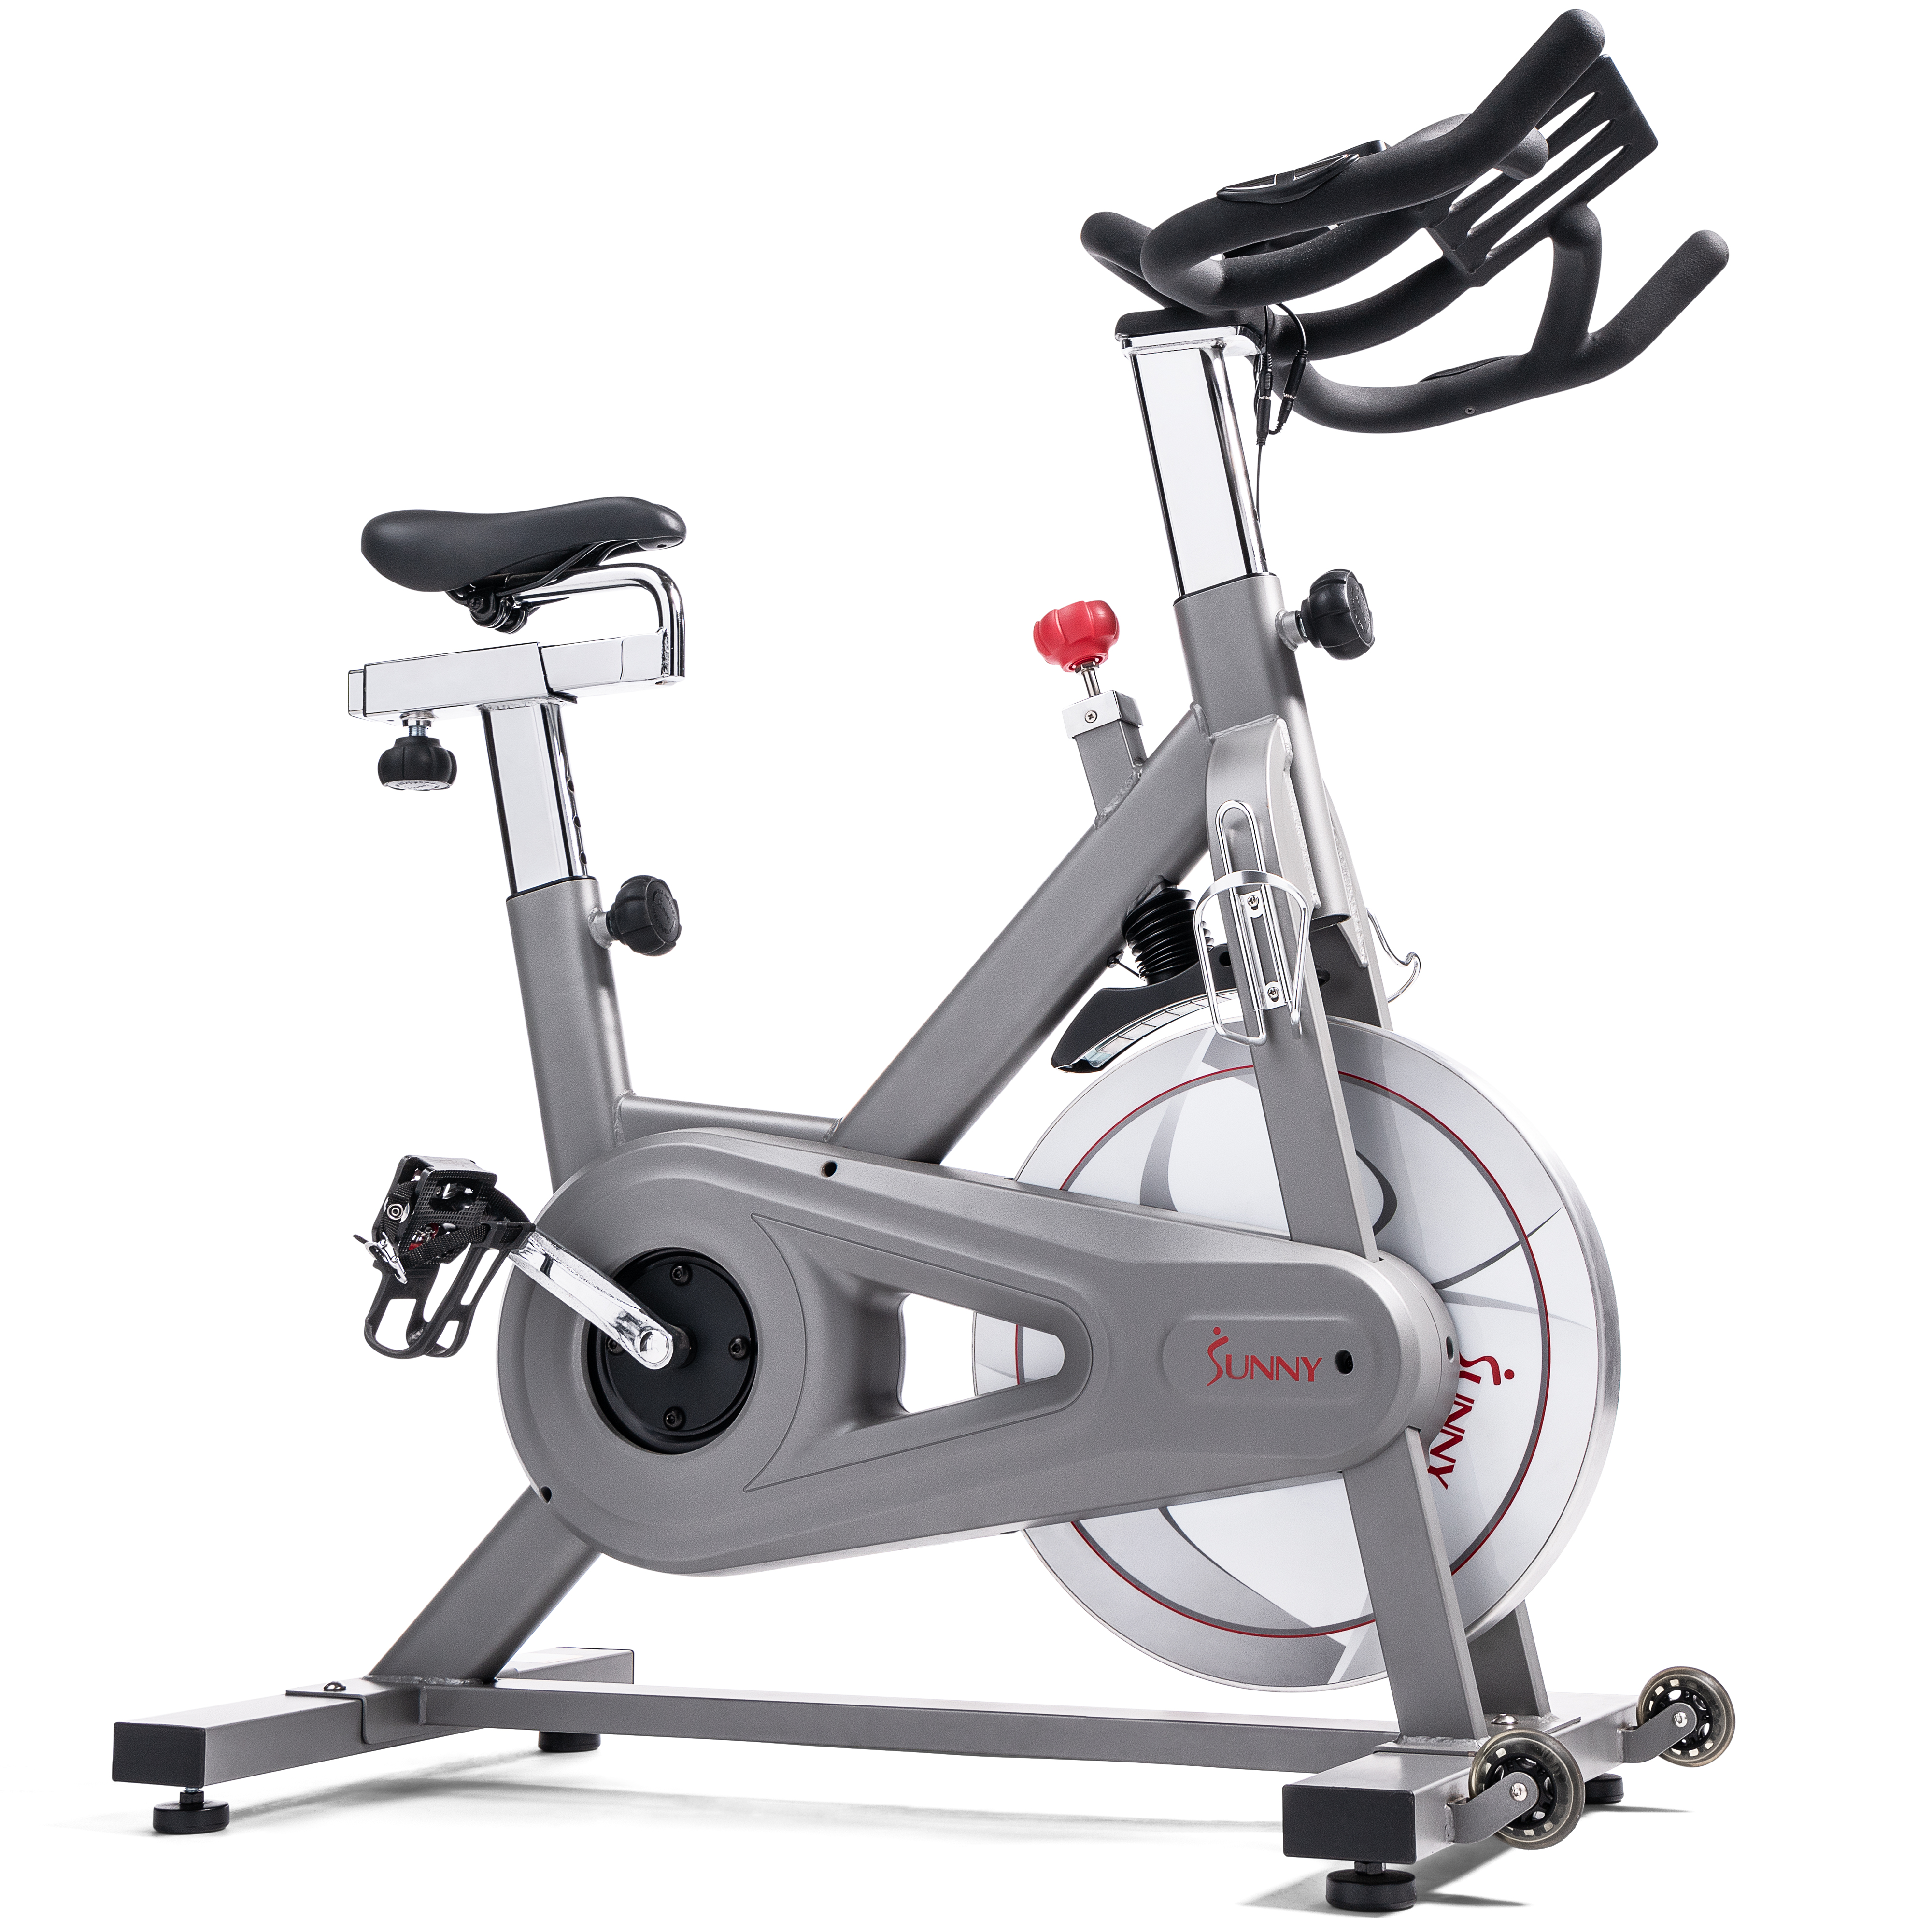 Sunny Health & Fitness Synergy Pro Magnetic Indoor Cycling Bike - SF-B1851 - image 1 of 13